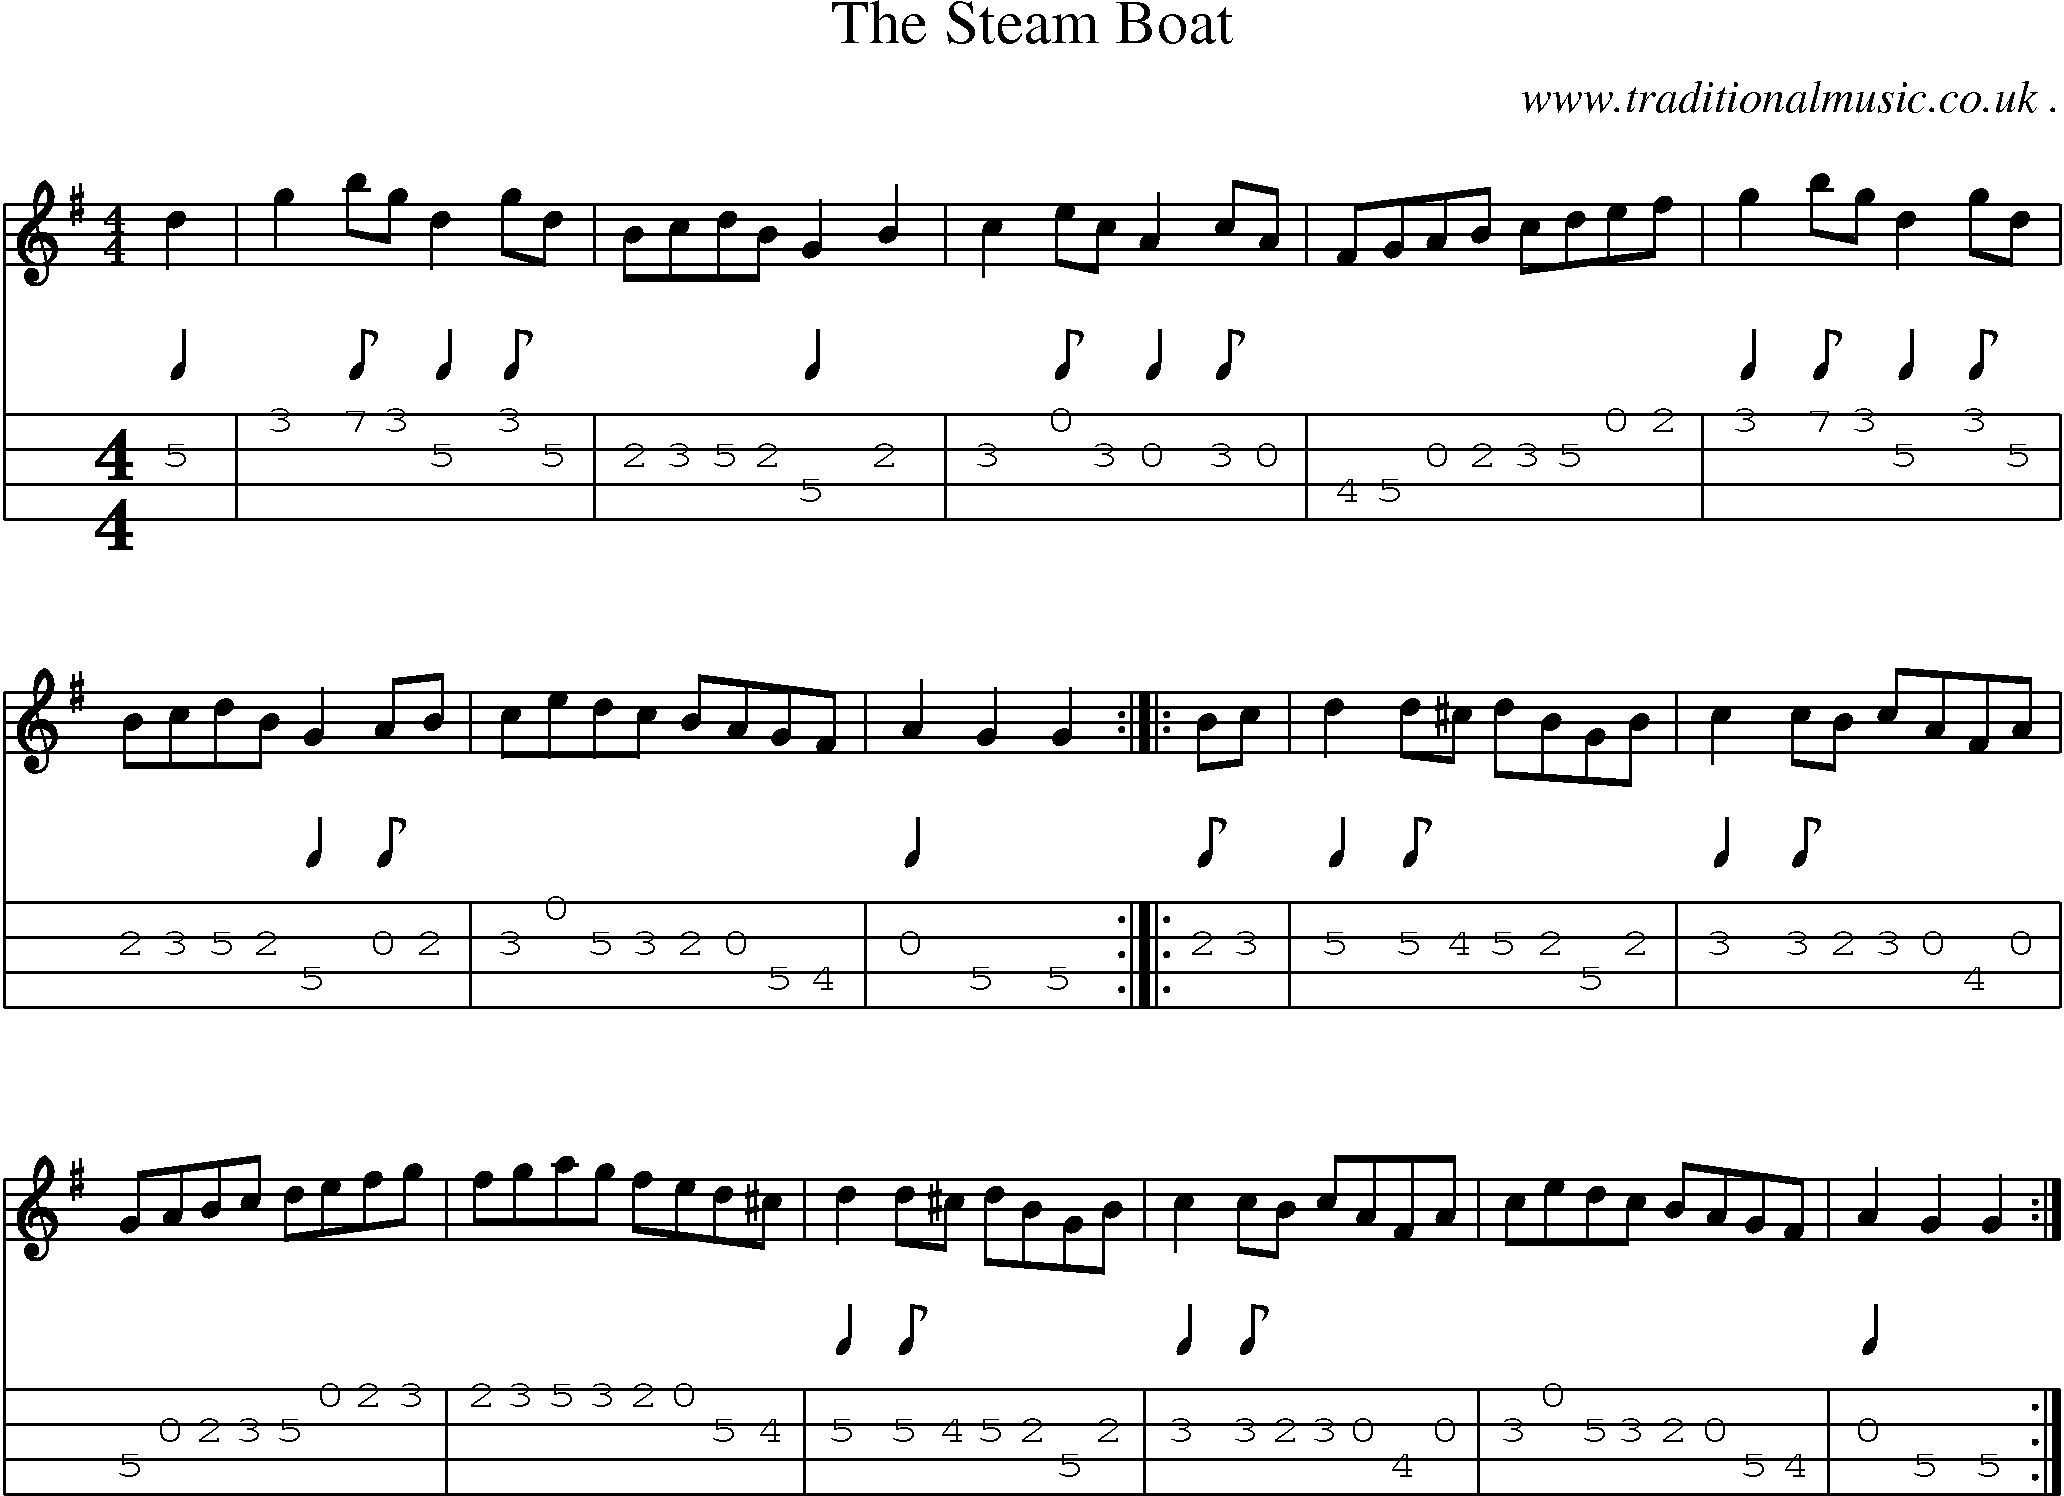 Sheet-music  score, Chords and Mandolin Tabs for The Steam Boat